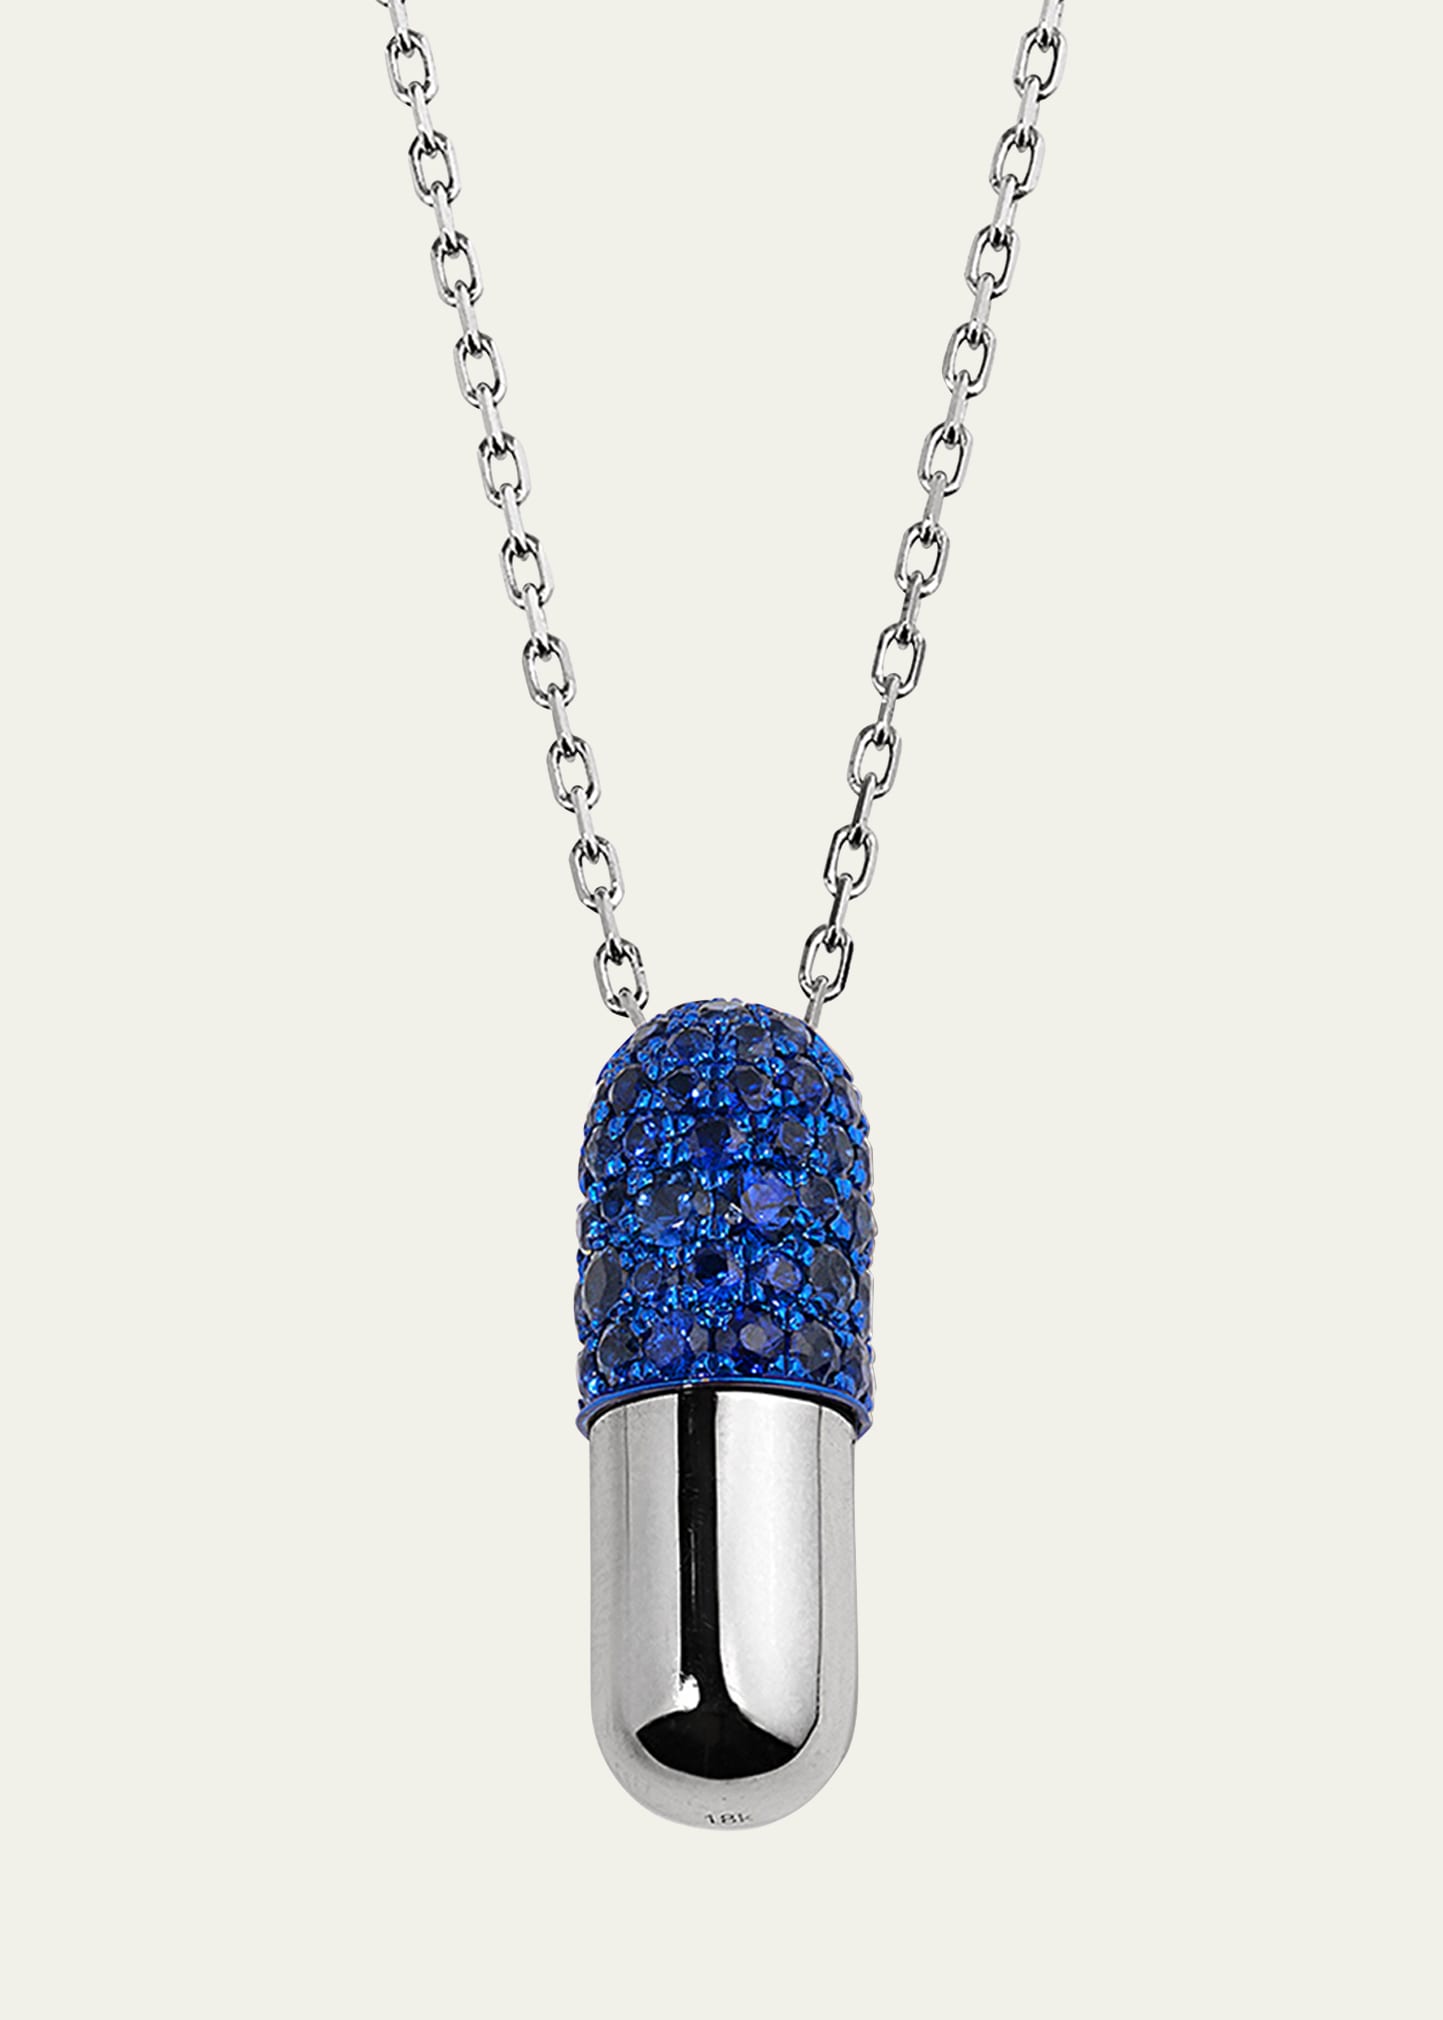 18K White Gold Grand Modèle Screw Pill Pendant Necklace with Blue Sapphires